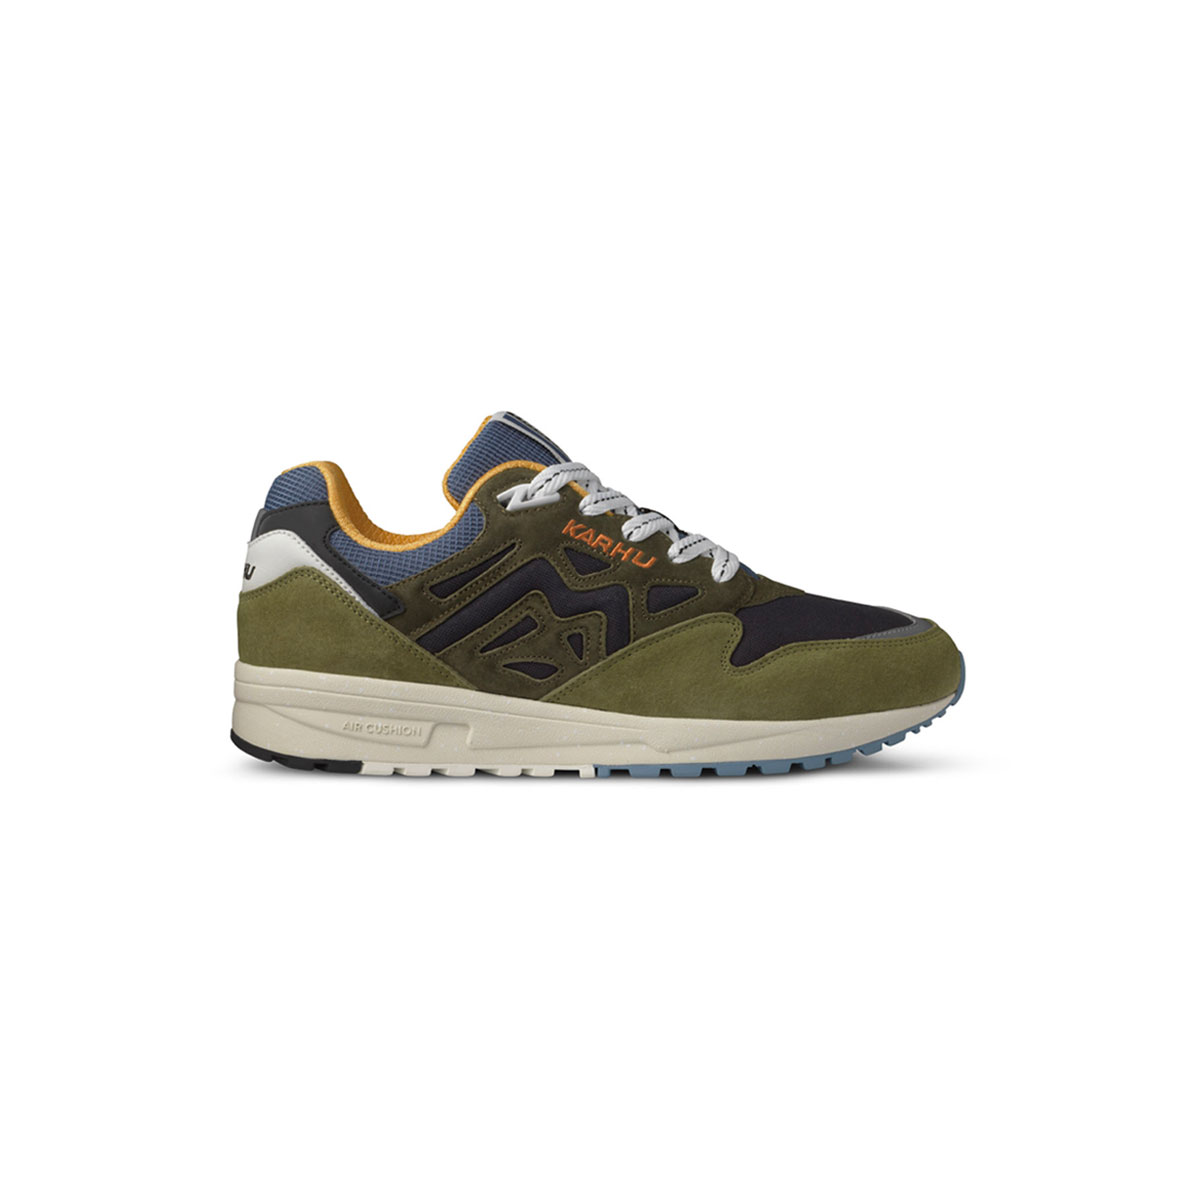 KARHU LEGACY 96 Green moss/ india ink ( Trees of Finland pack )